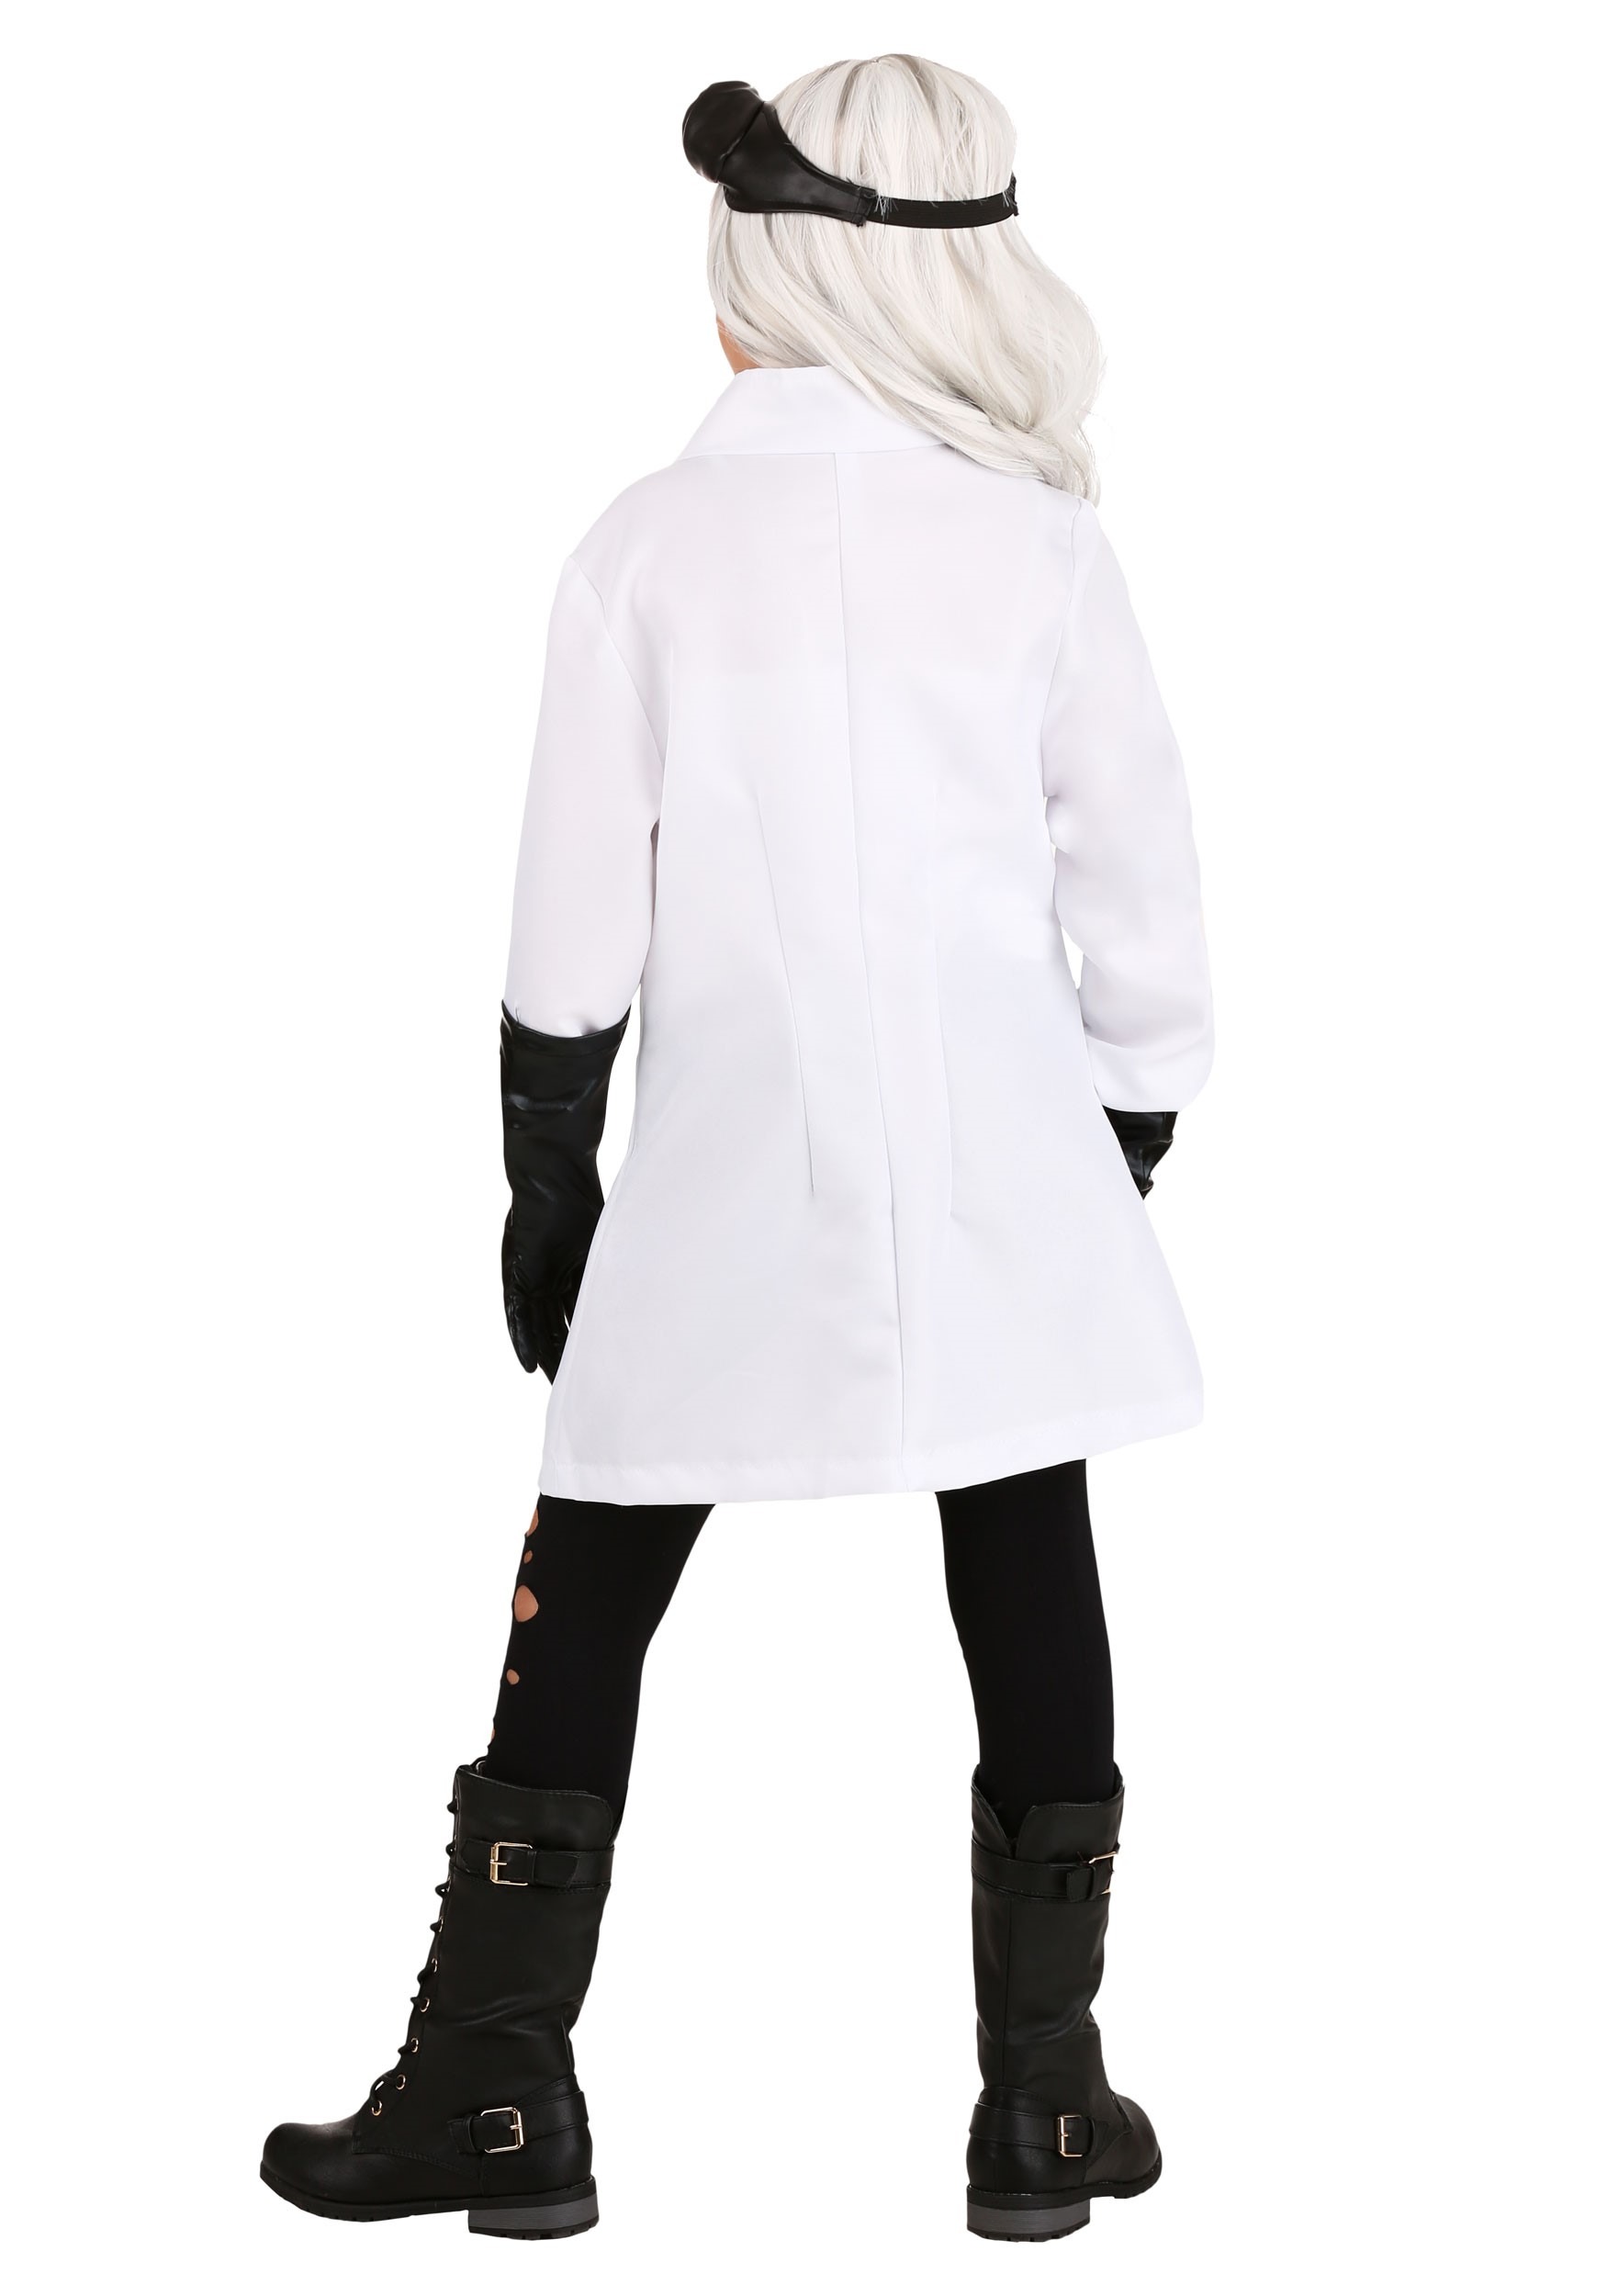 Mad Scientist Dress Costume For Girls